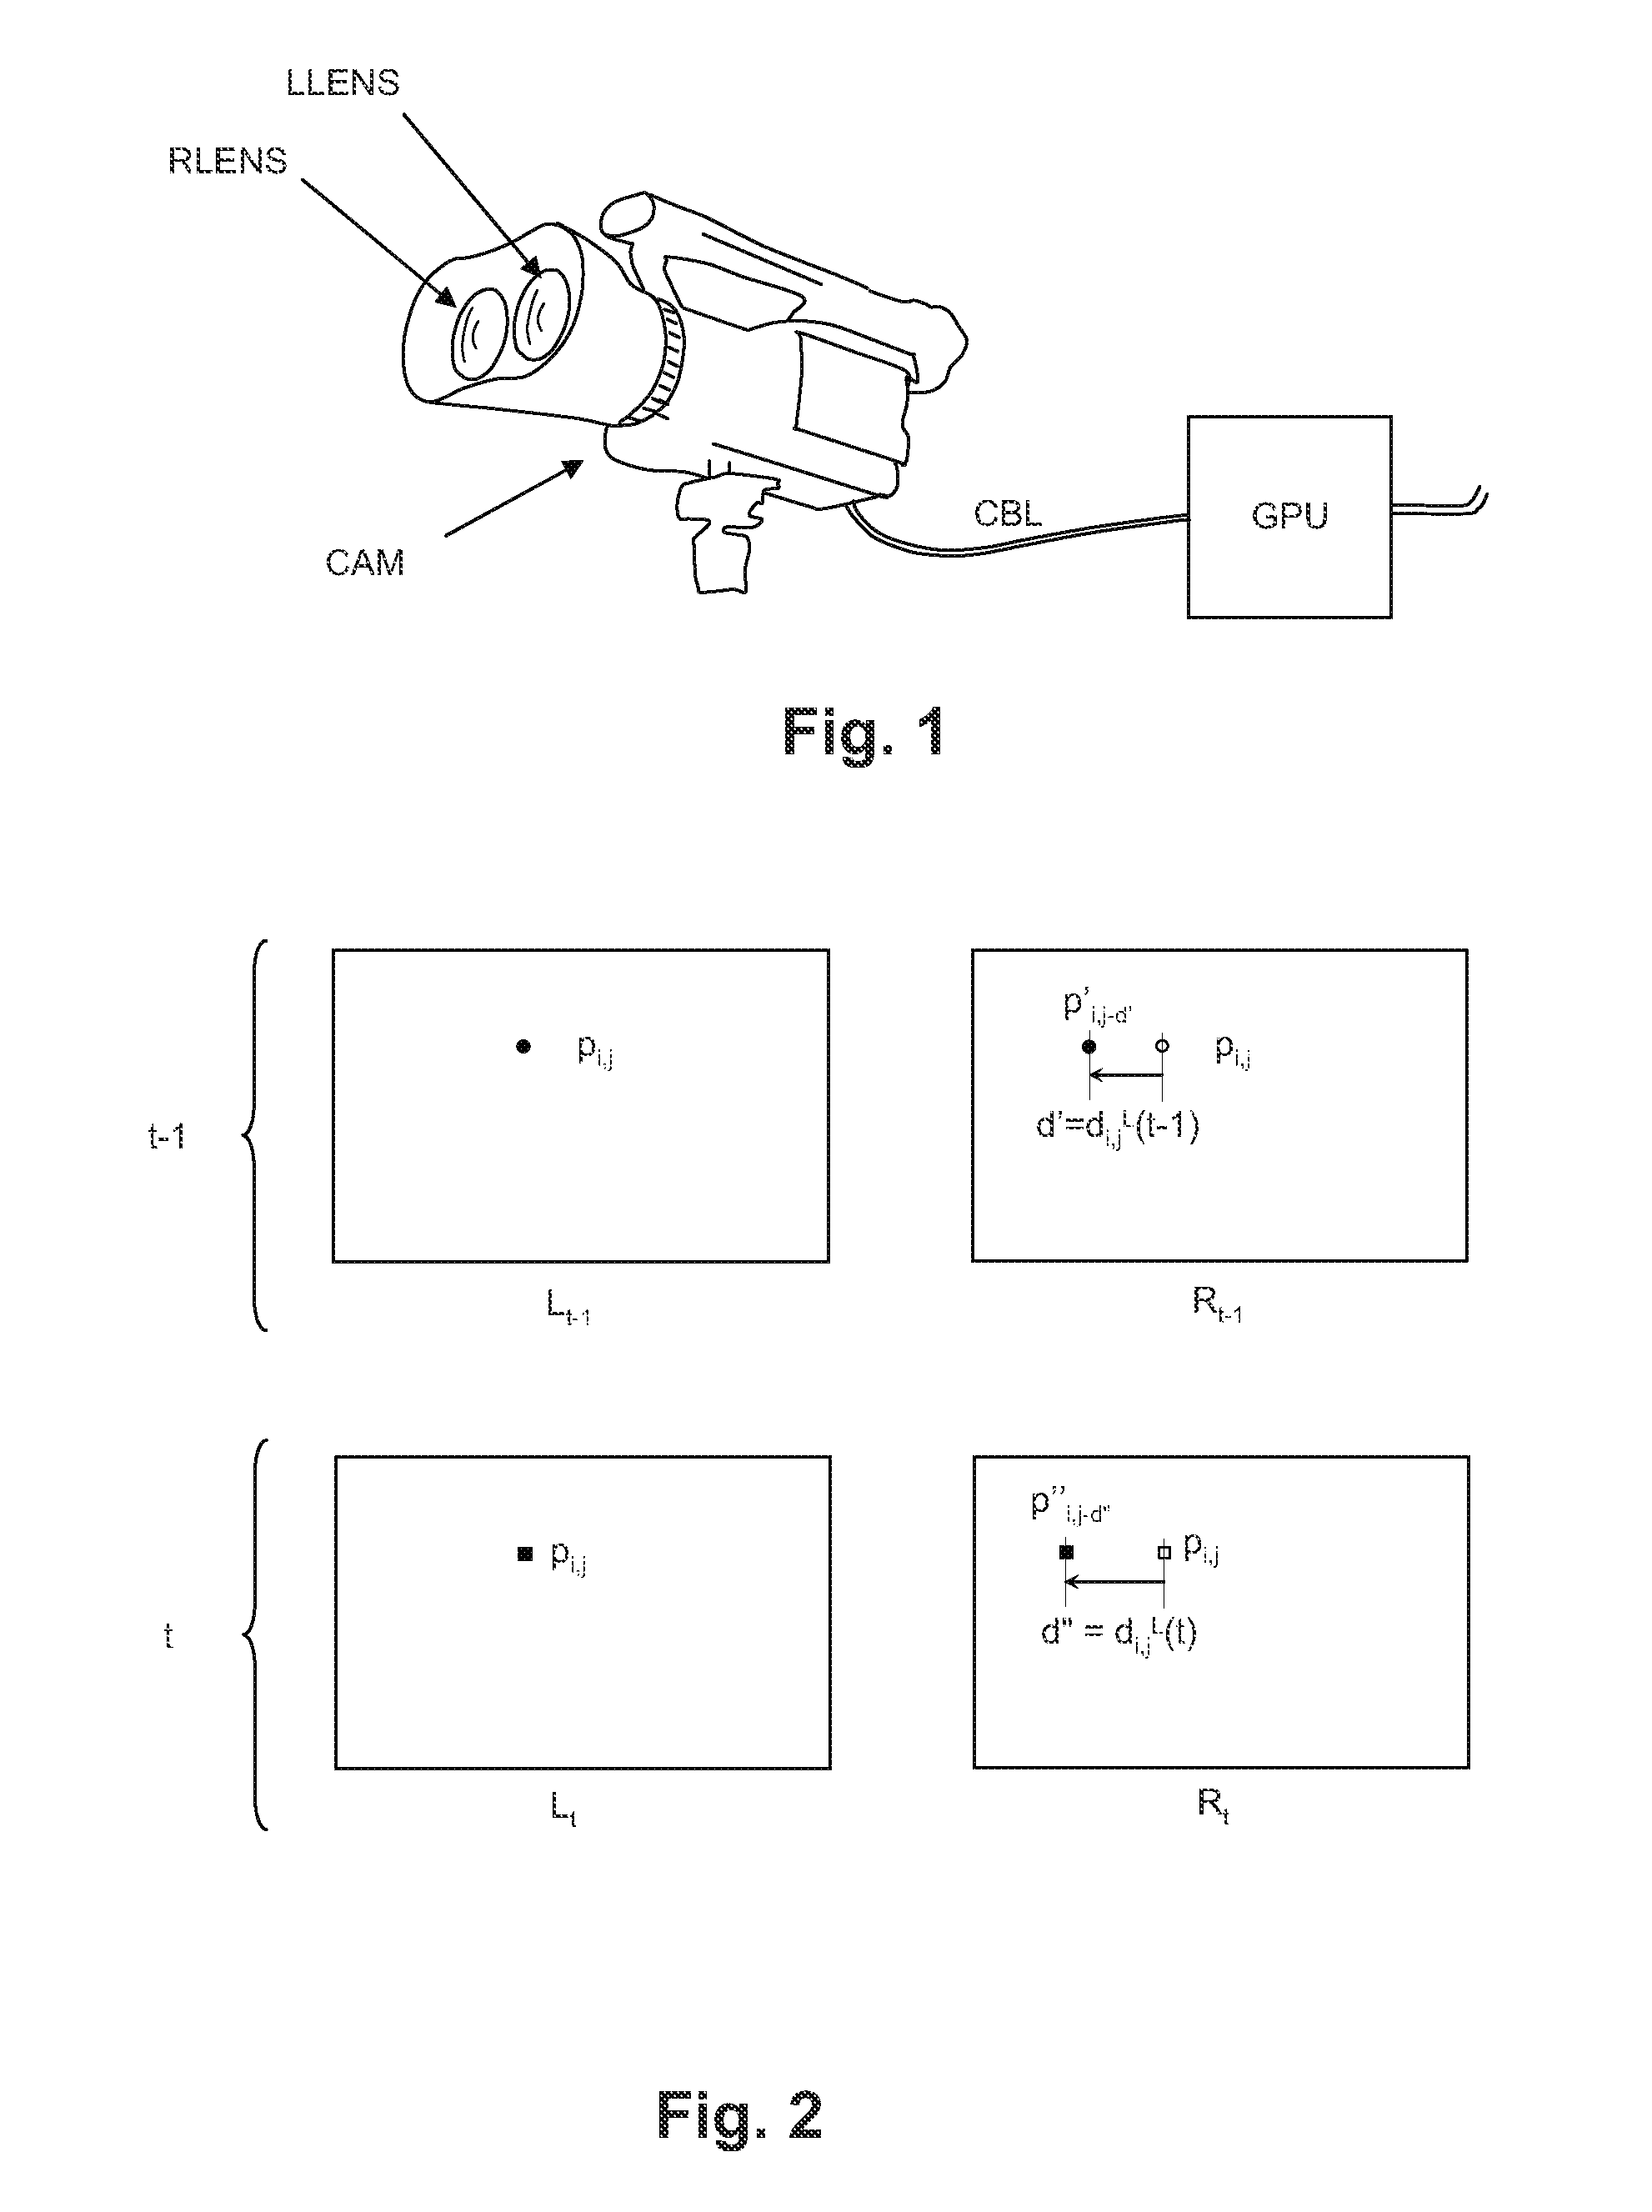 Method and device for providing temporally consistent disparity estimations